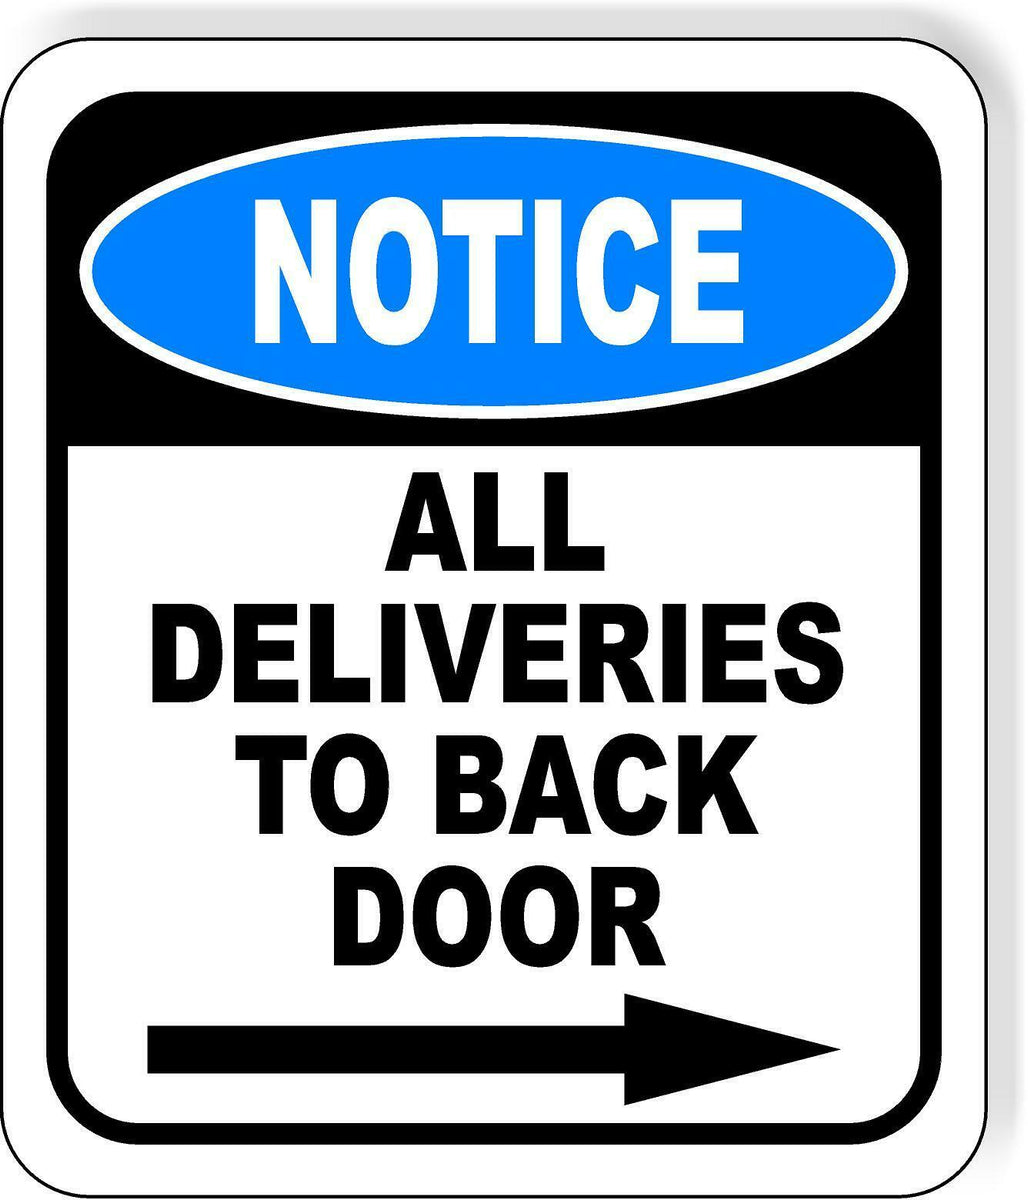 Notice All Deliveries To Back Door Right Arrow Aluminum Composite Sign Work House Signs 